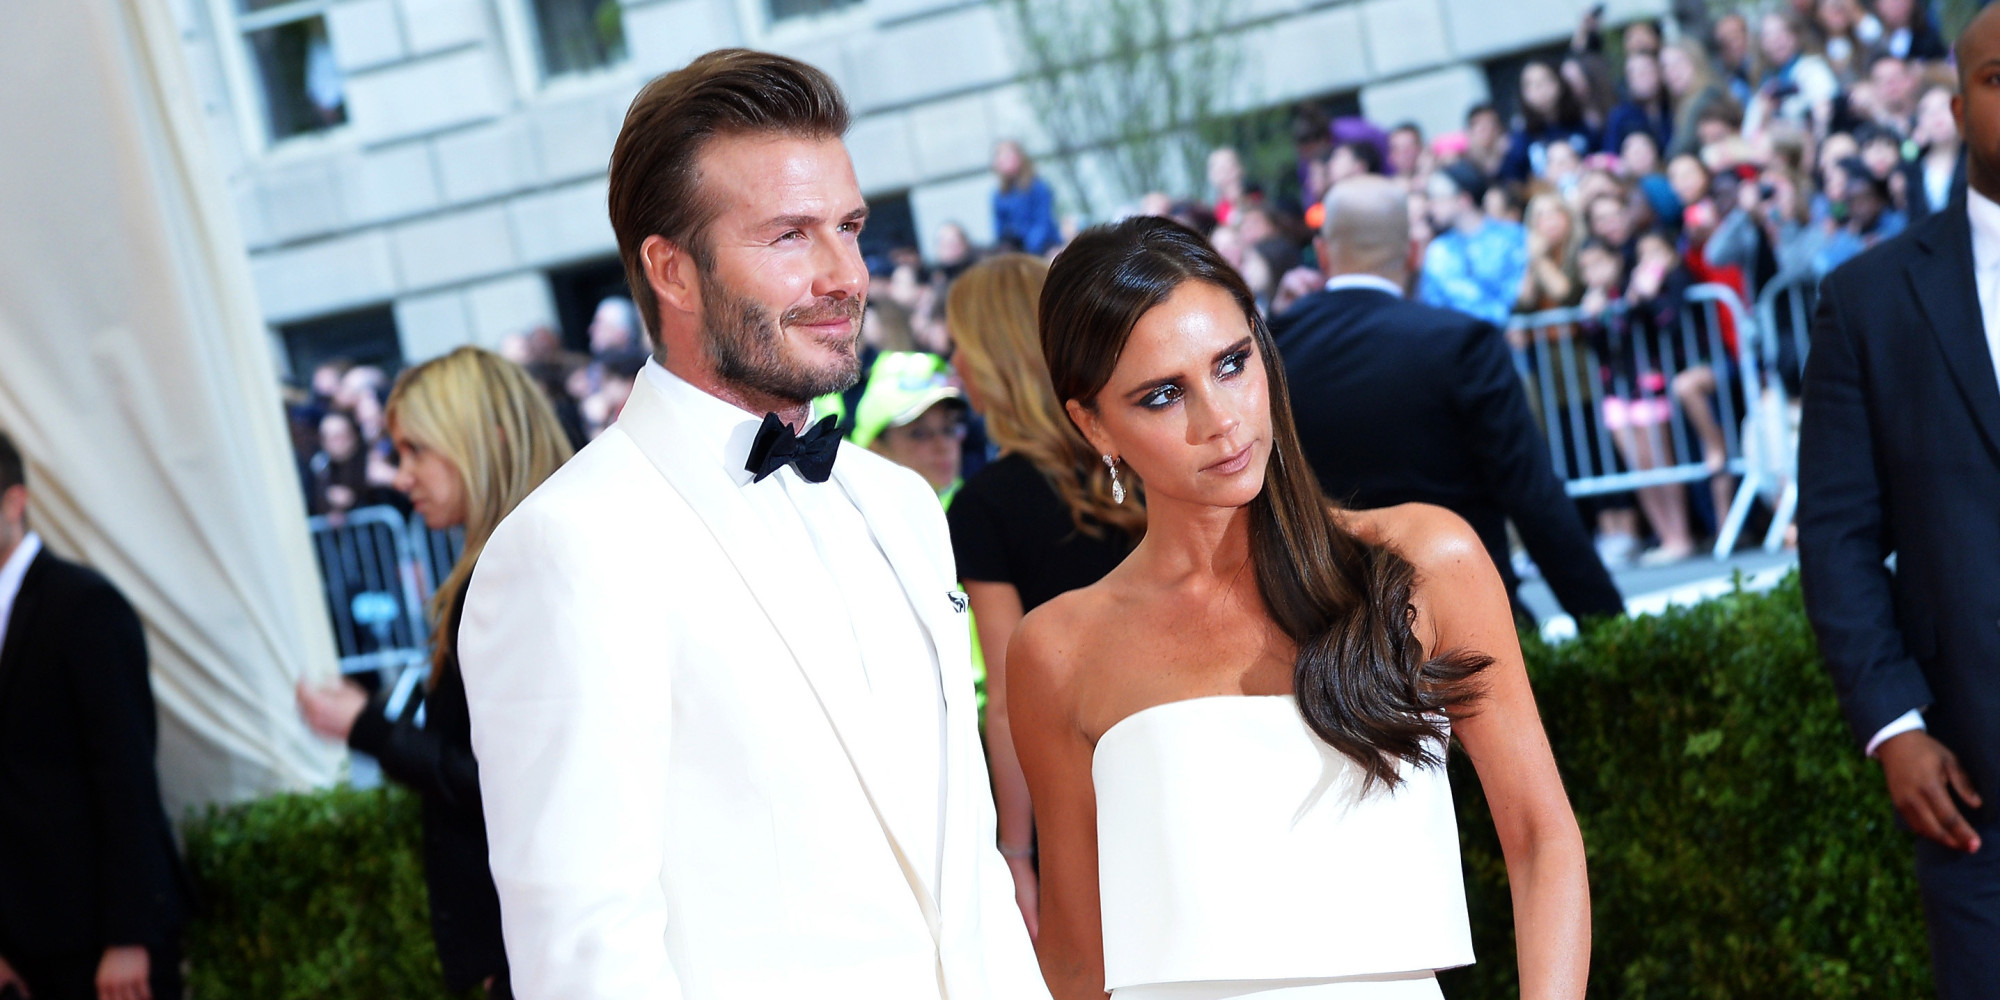 NEW YORK, NY - MAY 05: David Beckham (L) and Victoria Beckham attend the "Charles James: Beyond Fashion" Costume Institute Gala at the Metropolitan Museum of Art on May 5, 2014 in New York City.  (Photo by Mike Coppola/Getty Images)